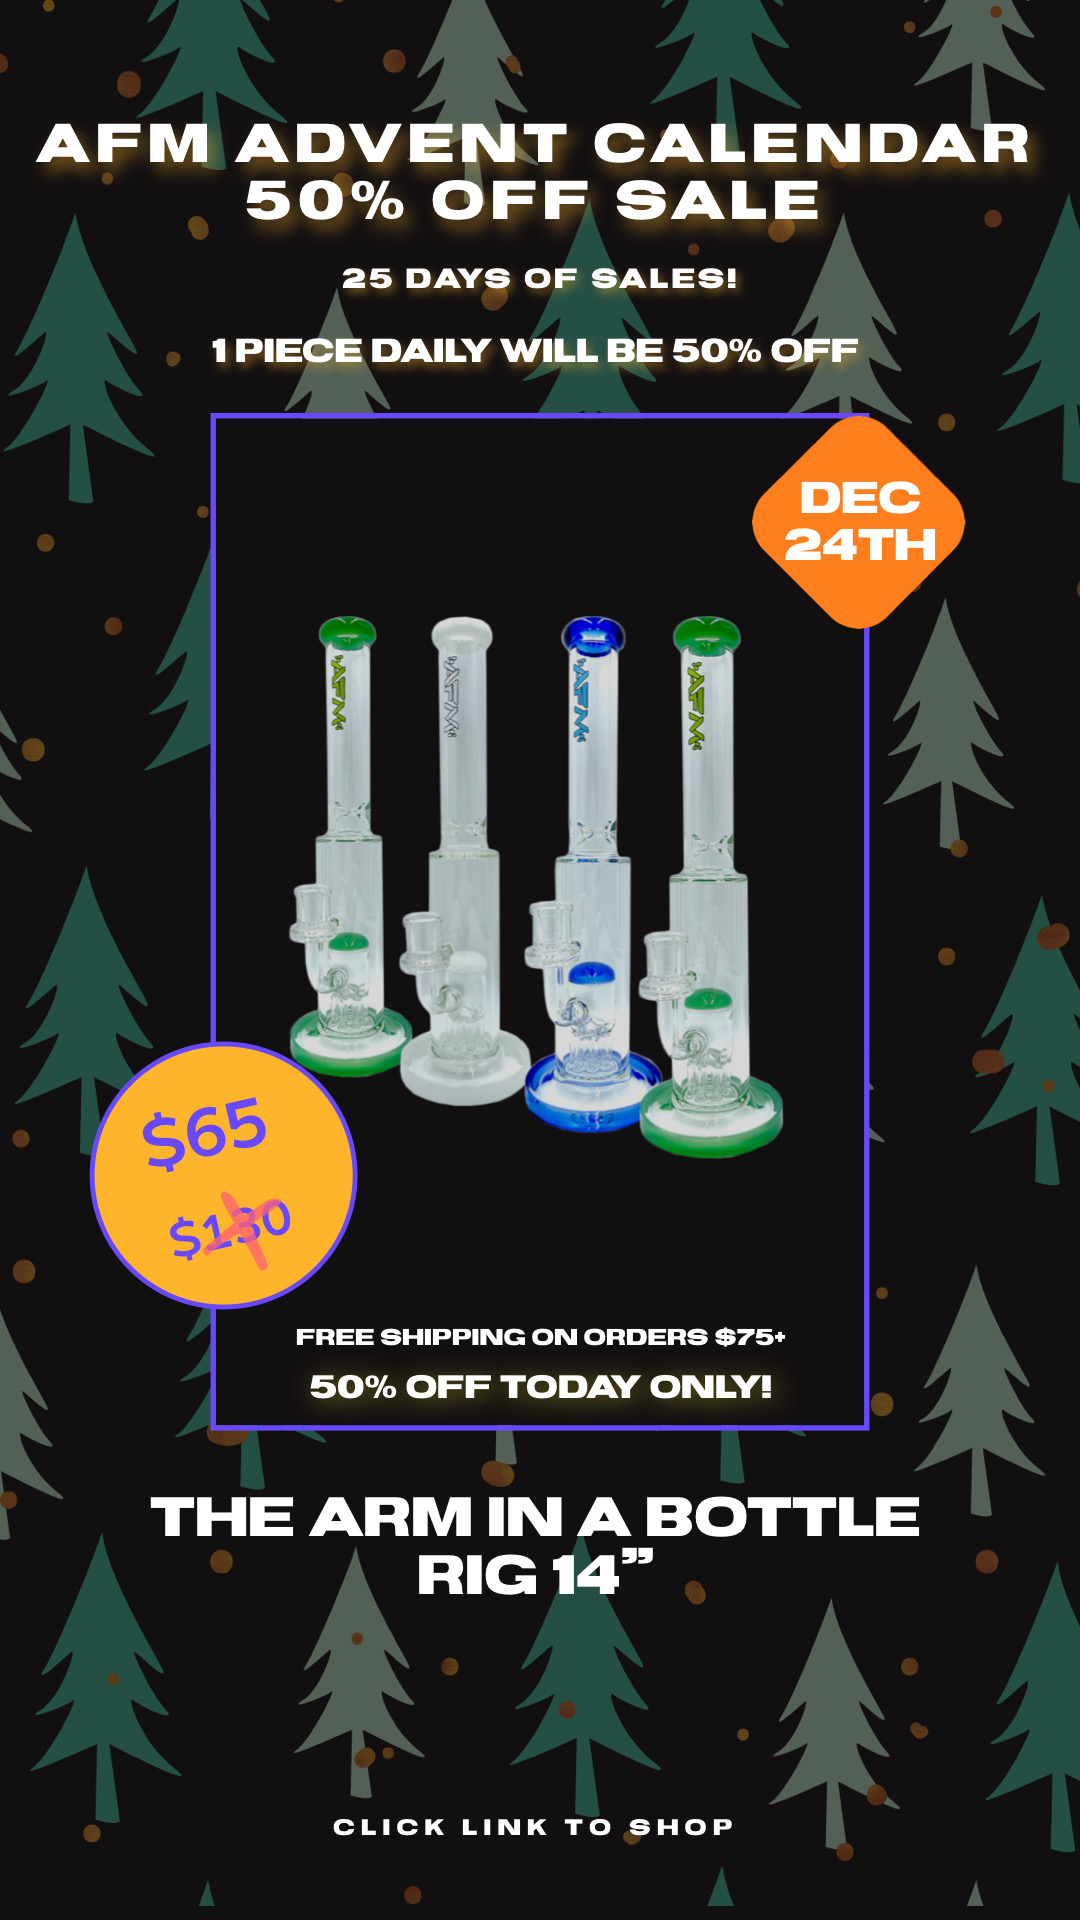 AFM ADVENT CALENDAR 50% OFF SALE 25 DAYS OF SALES! 1PIECE DAILY WILL BE 50% OFF FREE SHIPPING ON ORDERS $75 50% OFF TODAY ONLLY! THE ARMIN A BOTTLE RIG 14 CLICK LINK TO SHOP 